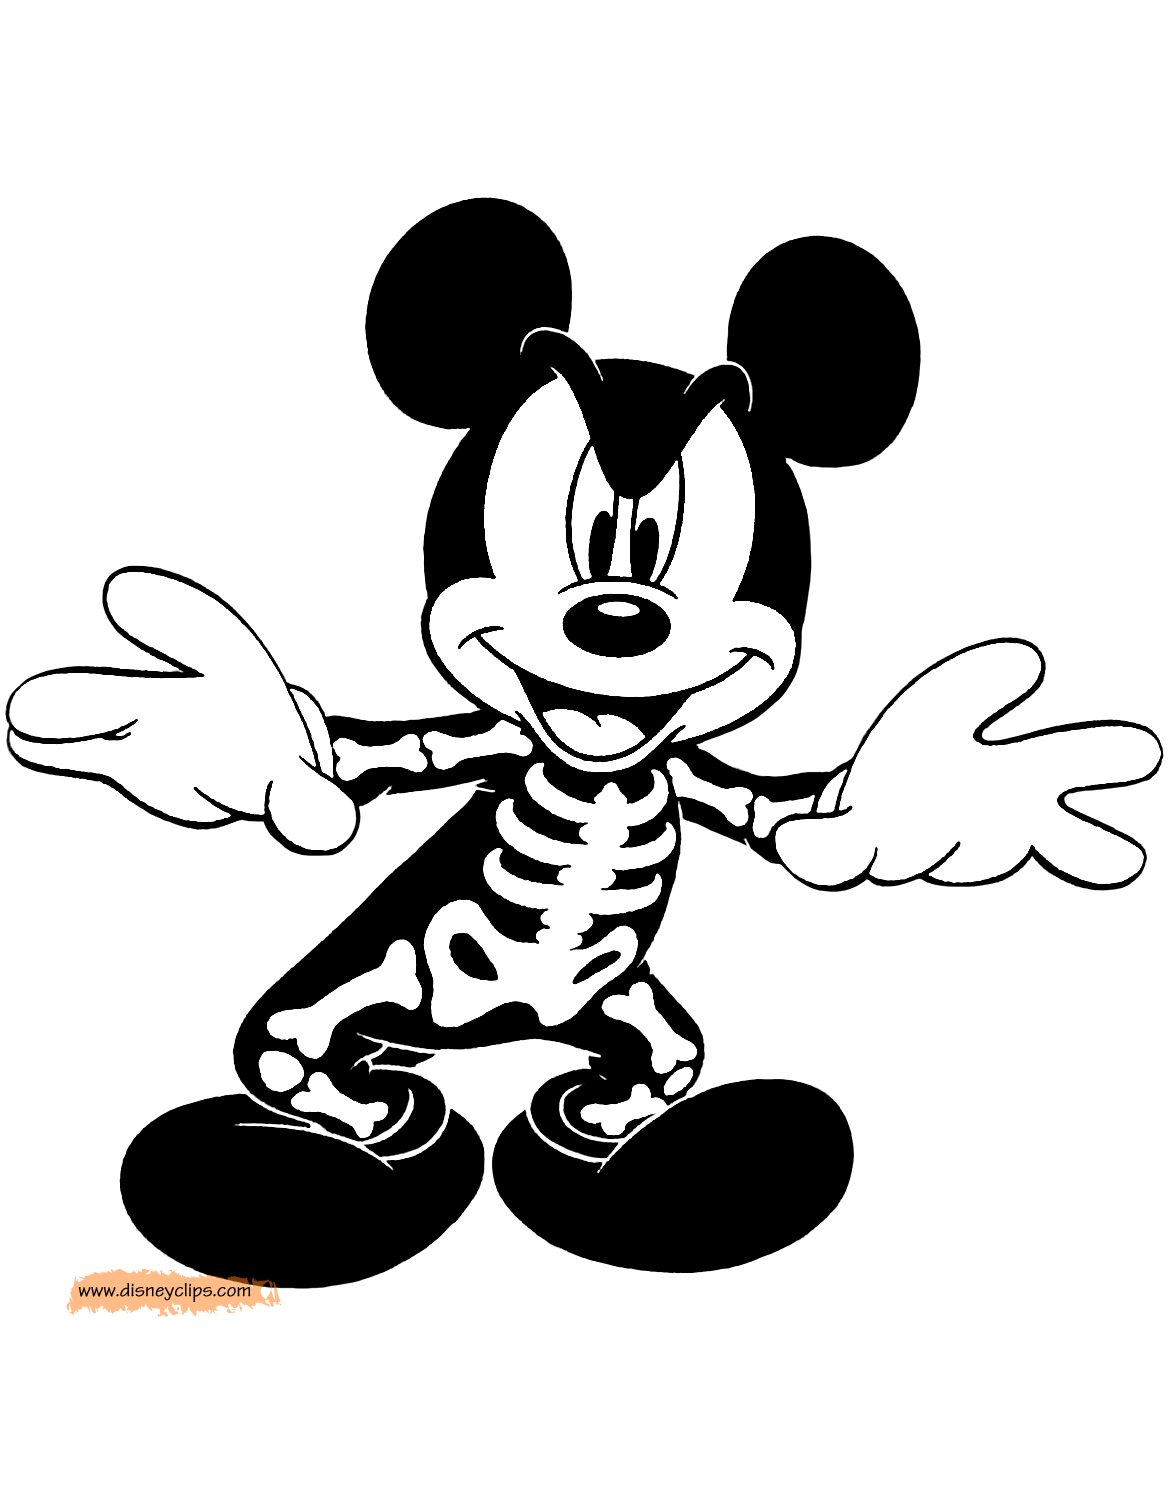 Mickey And Minnie Coloring Pages To Print Coloring Ideas Mickeynd Minnie Disney Halloween Coloring Pages